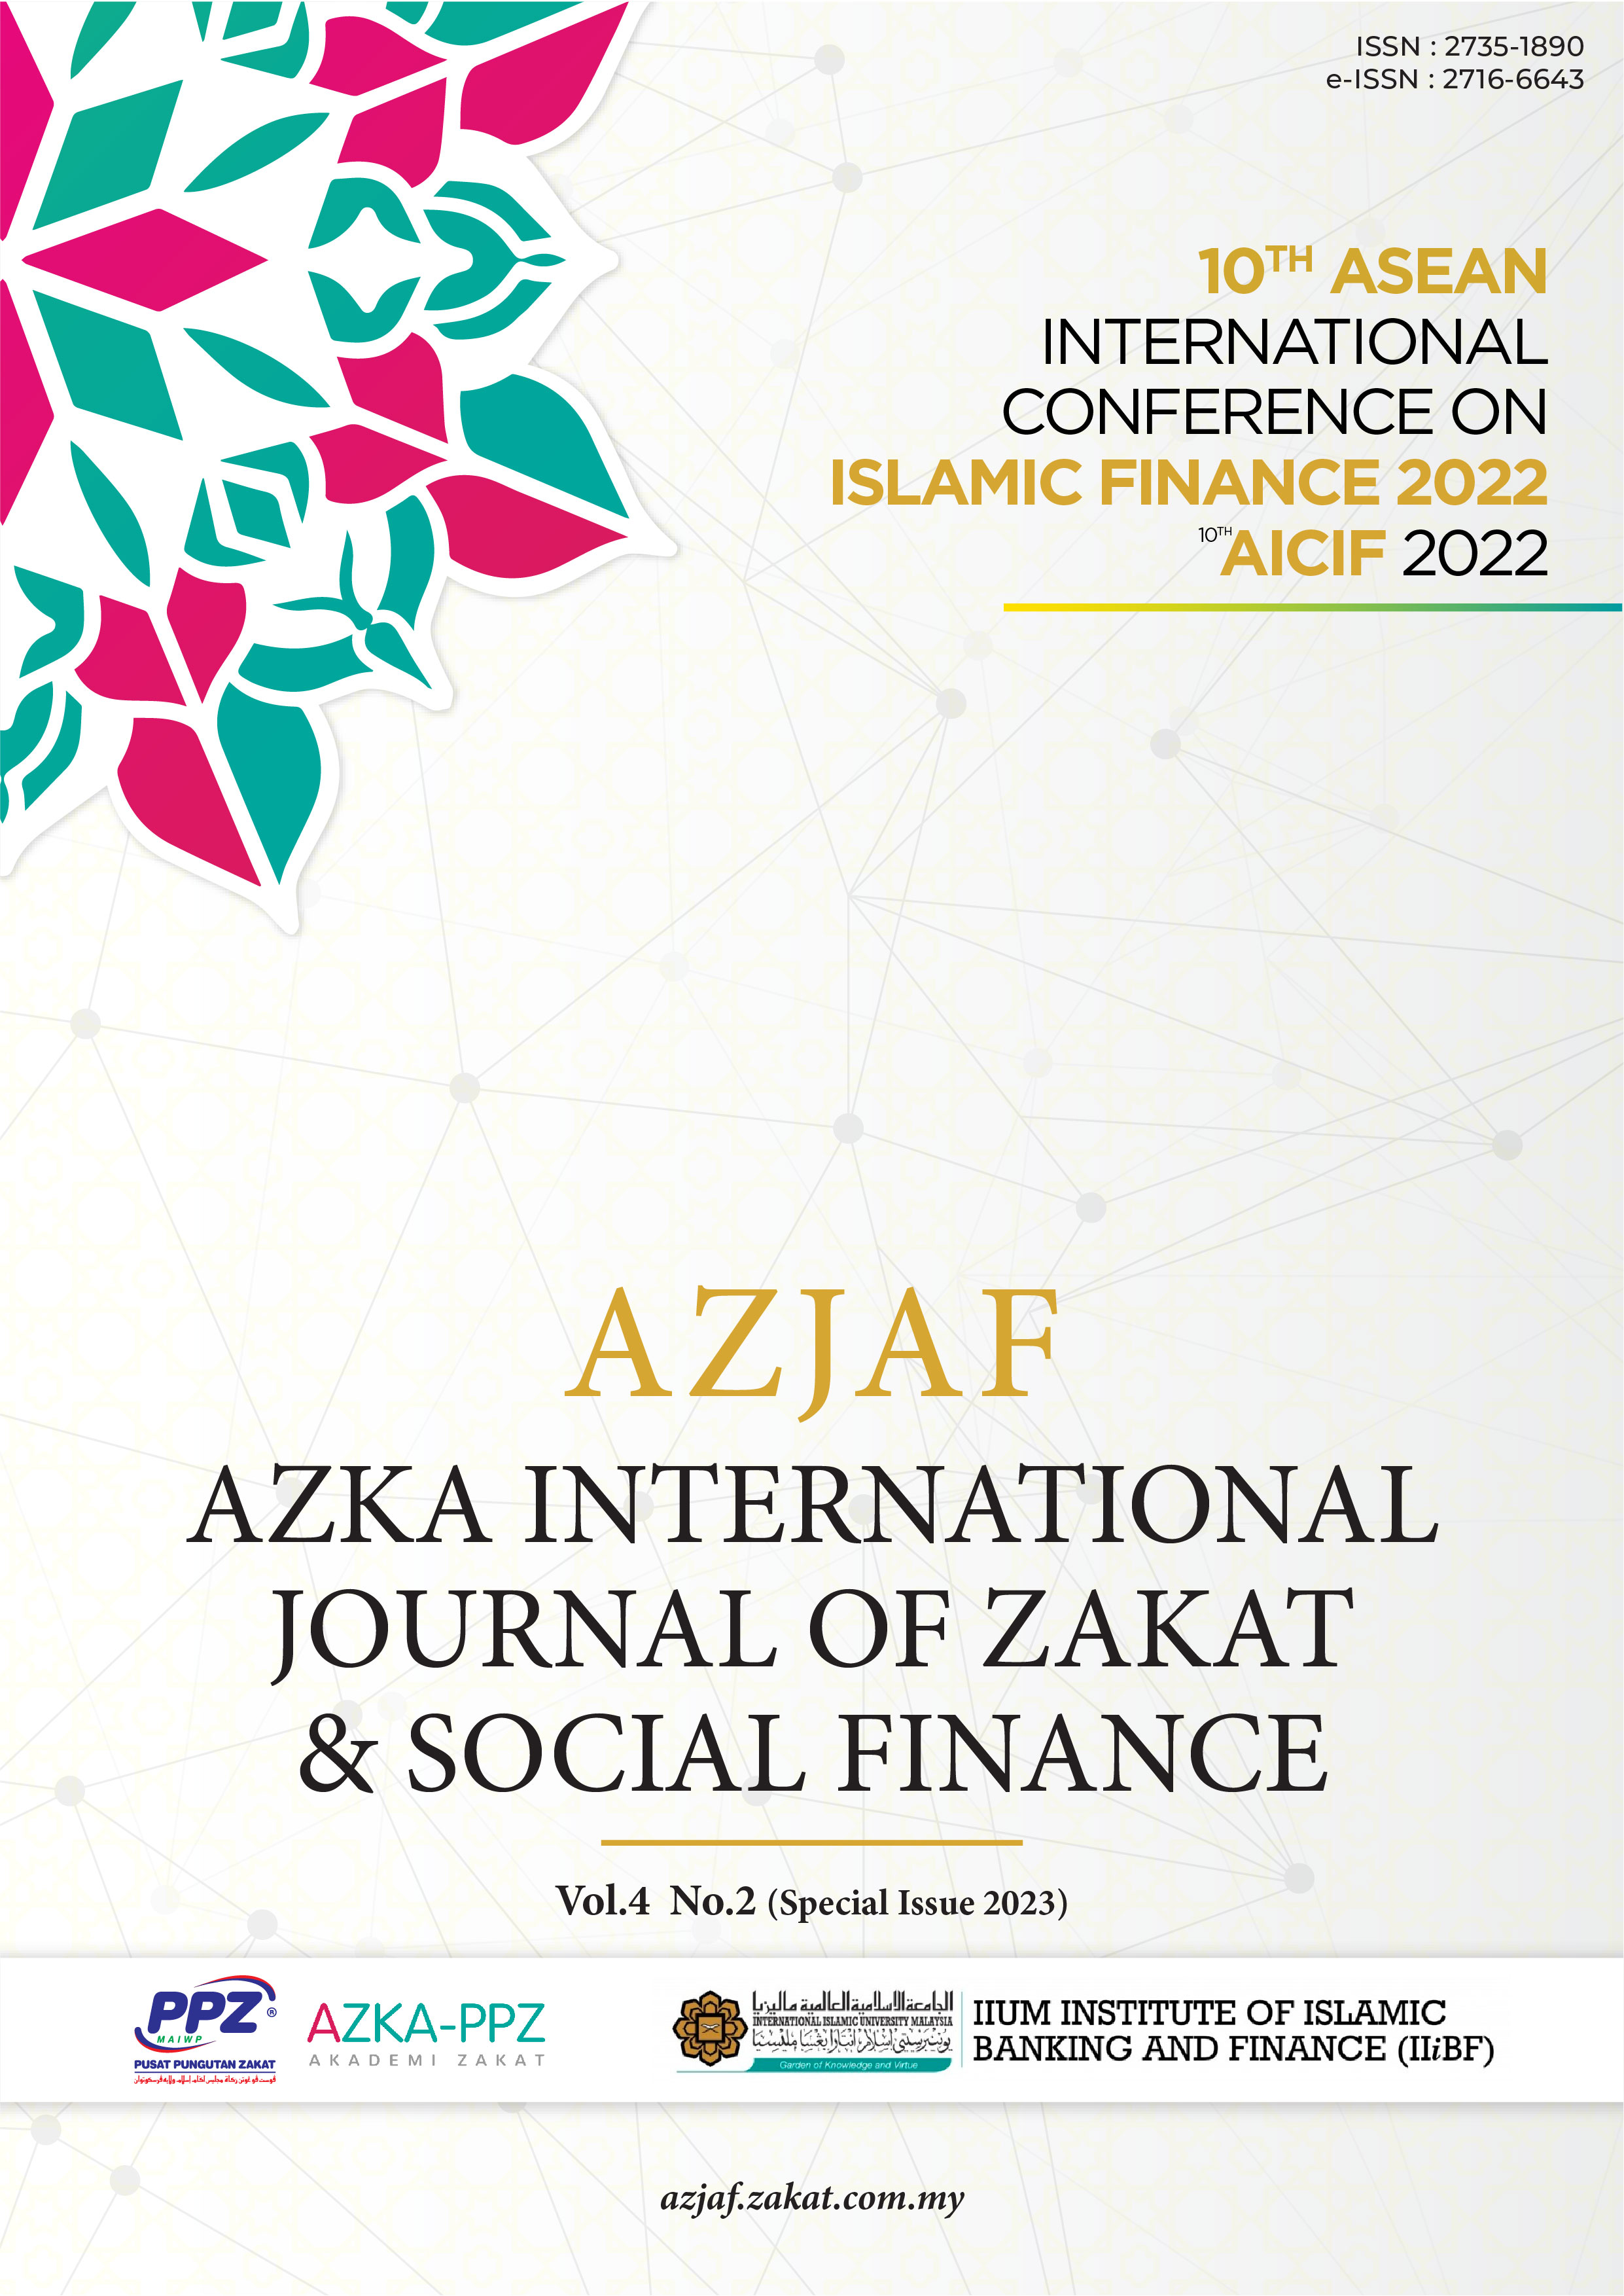 					View AZJAF Vol.4 No.2 (Special Issue 2023)
				